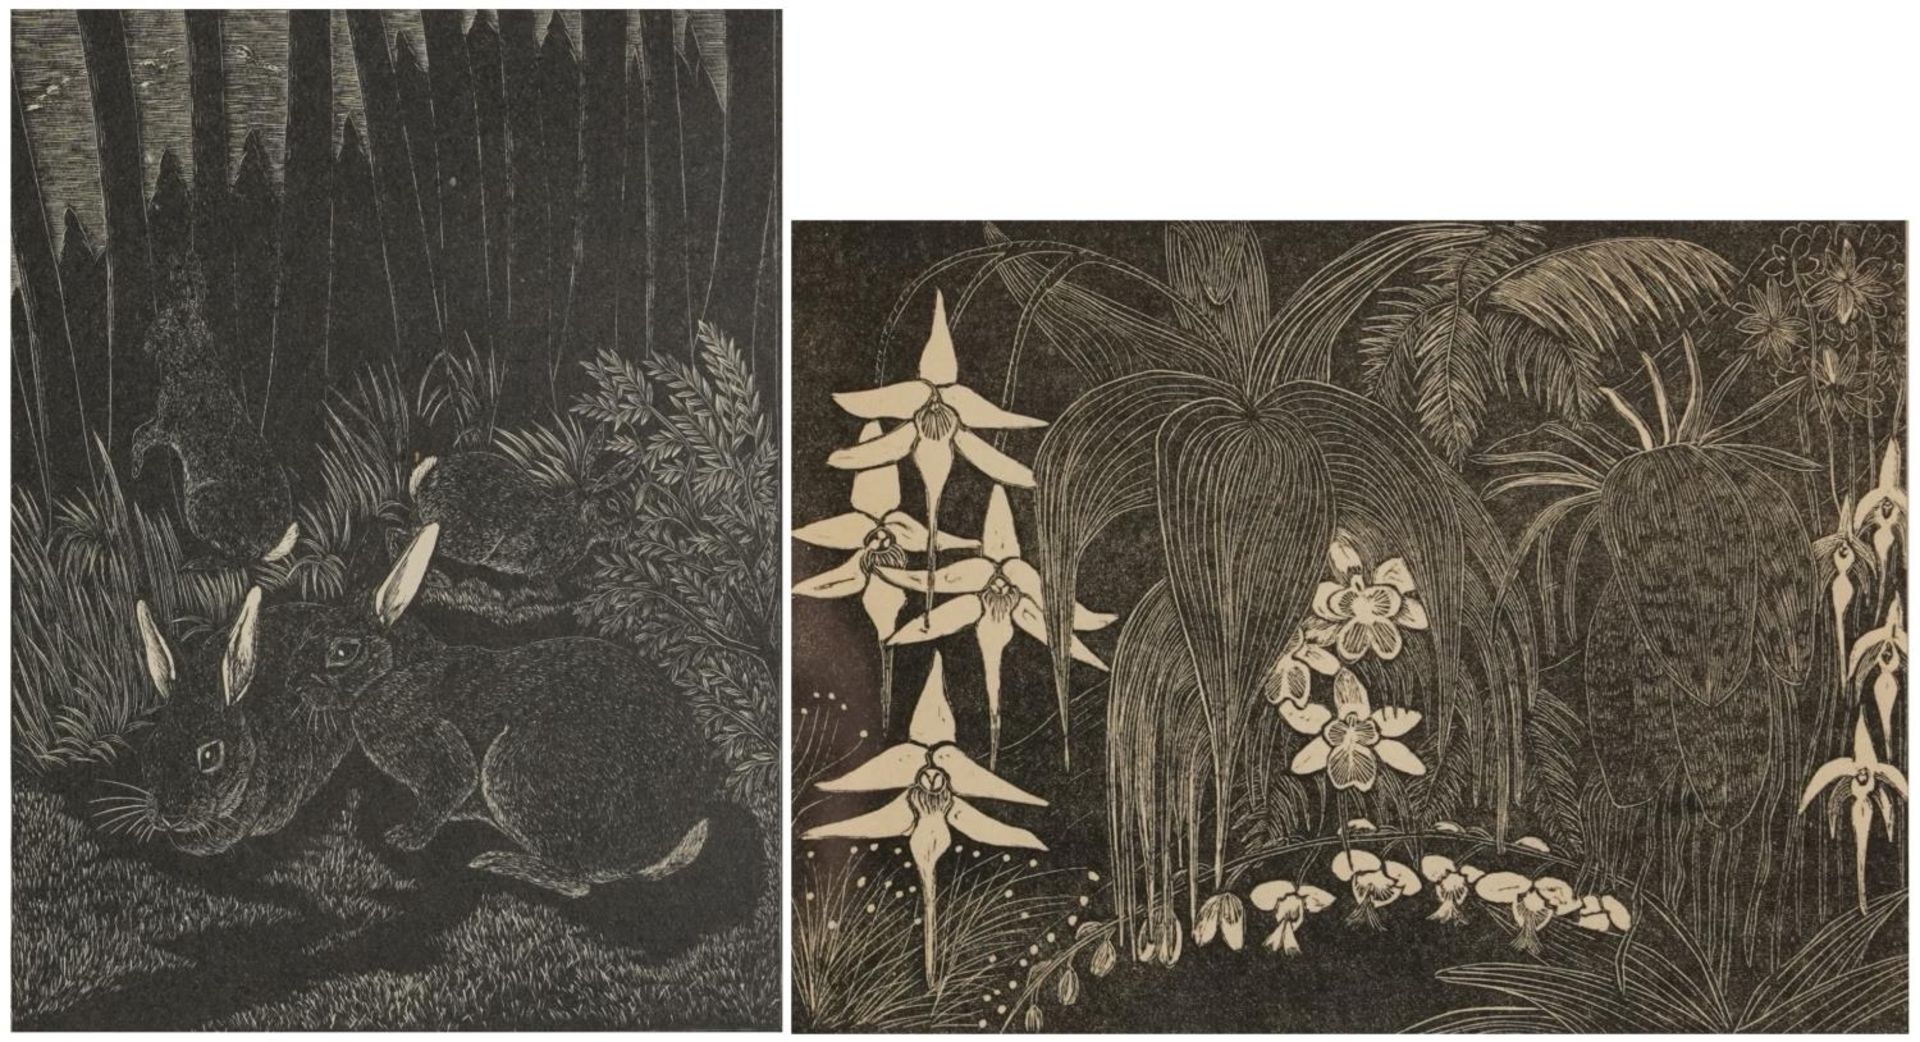 Eric F Daglish - Edge of the Wood and The Chapbook a Miscellany, two wood engravings, each with